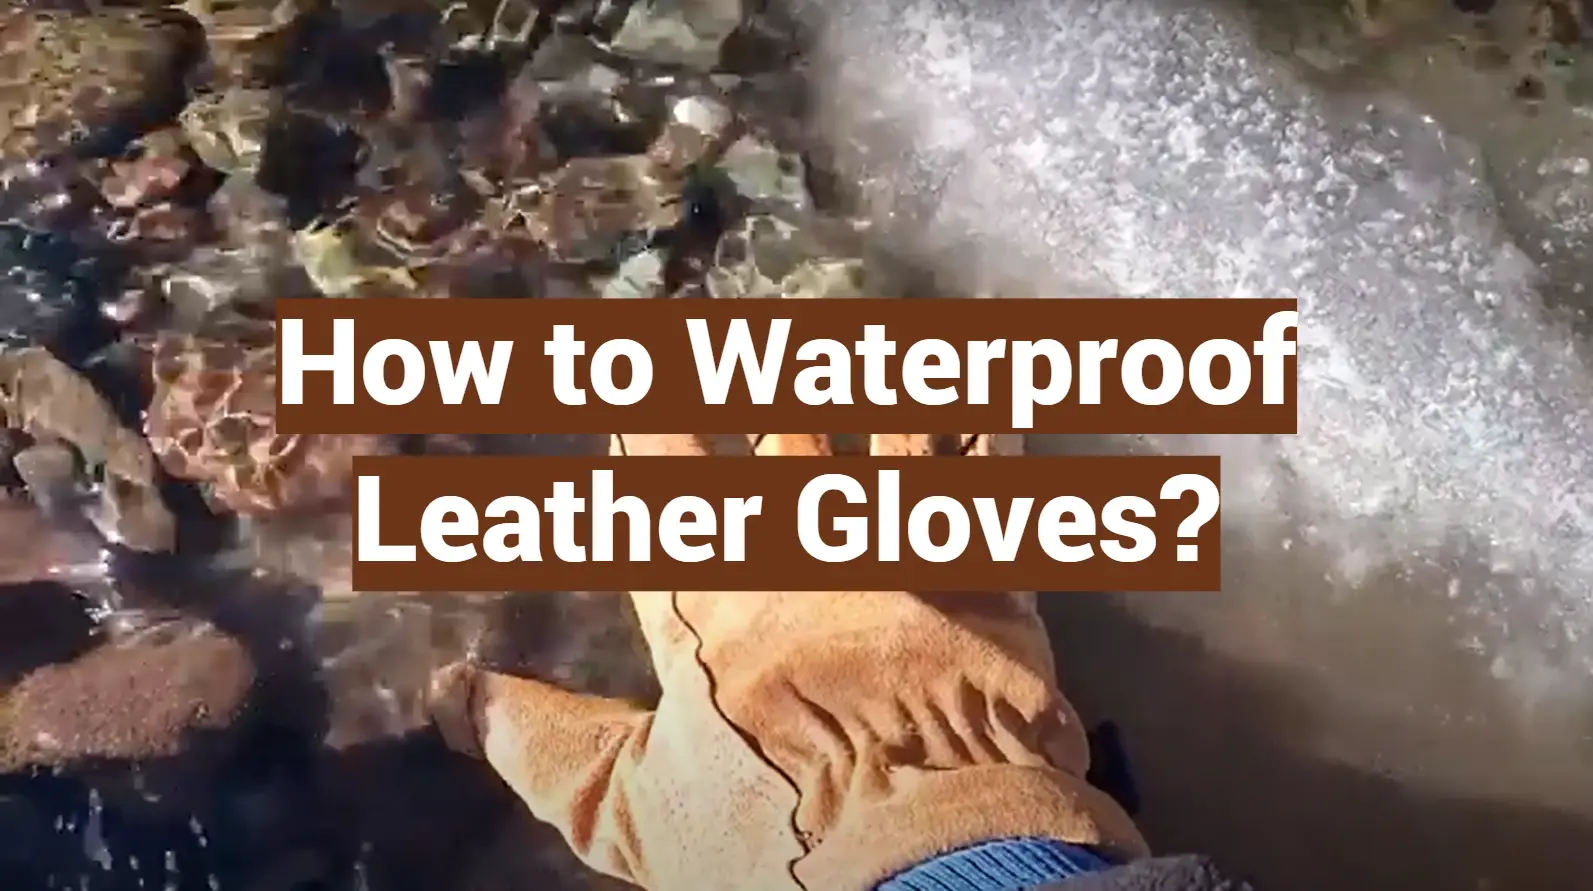 How to Waterproof Leather Gloves?